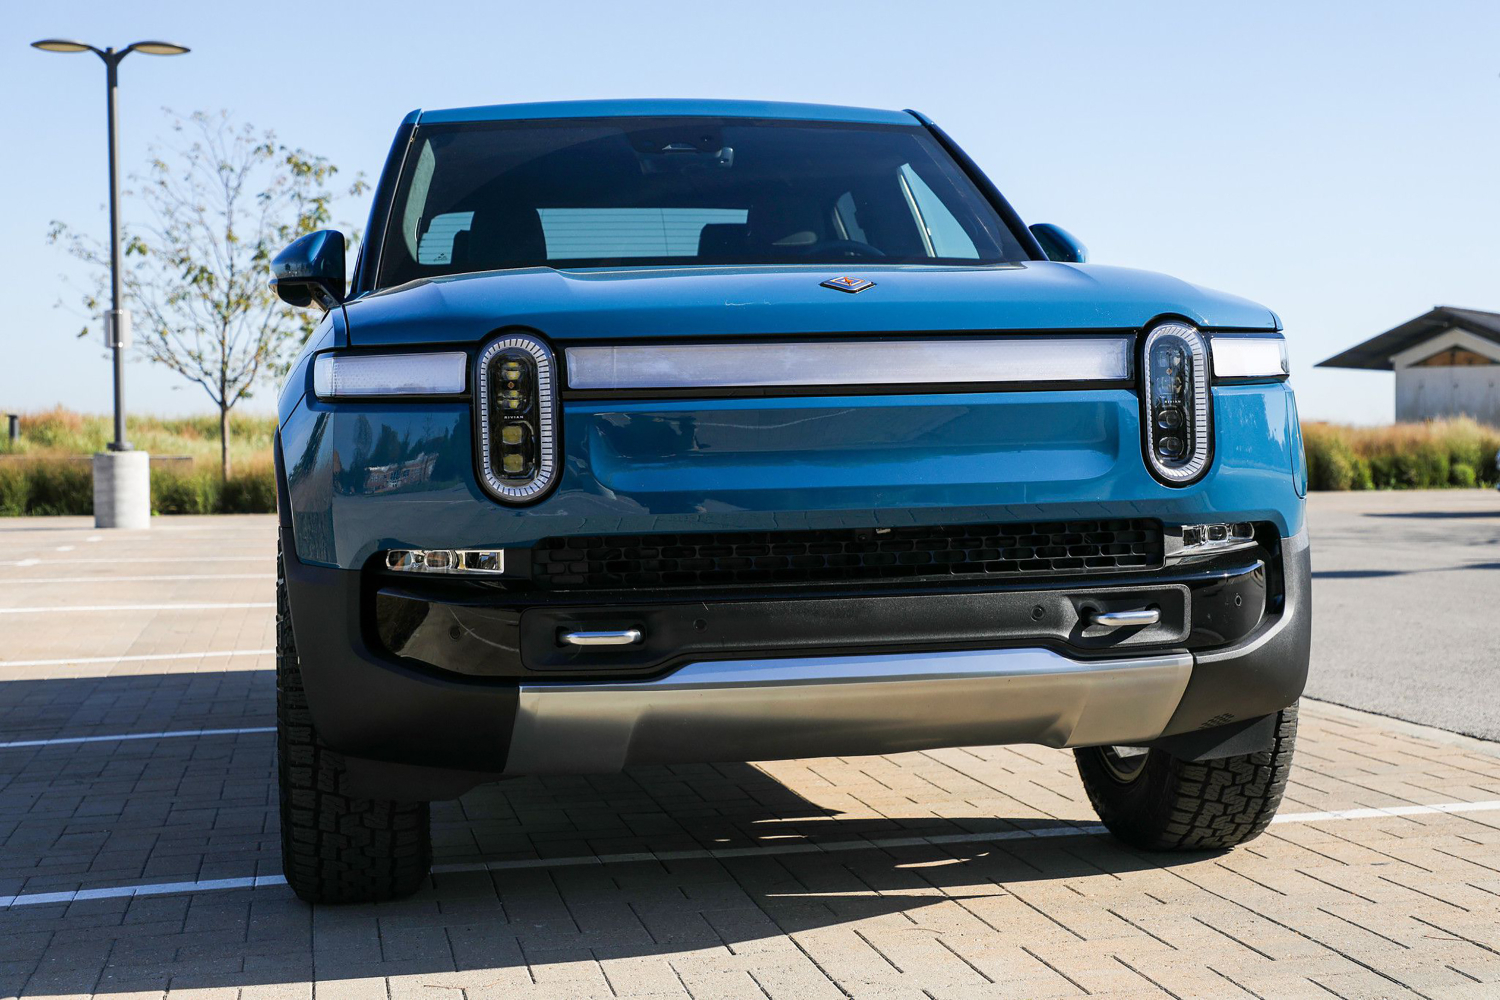 Former Rivian Executive Sues Electric Truck Maker for Gender Discrimination Ahead of $60B IPO